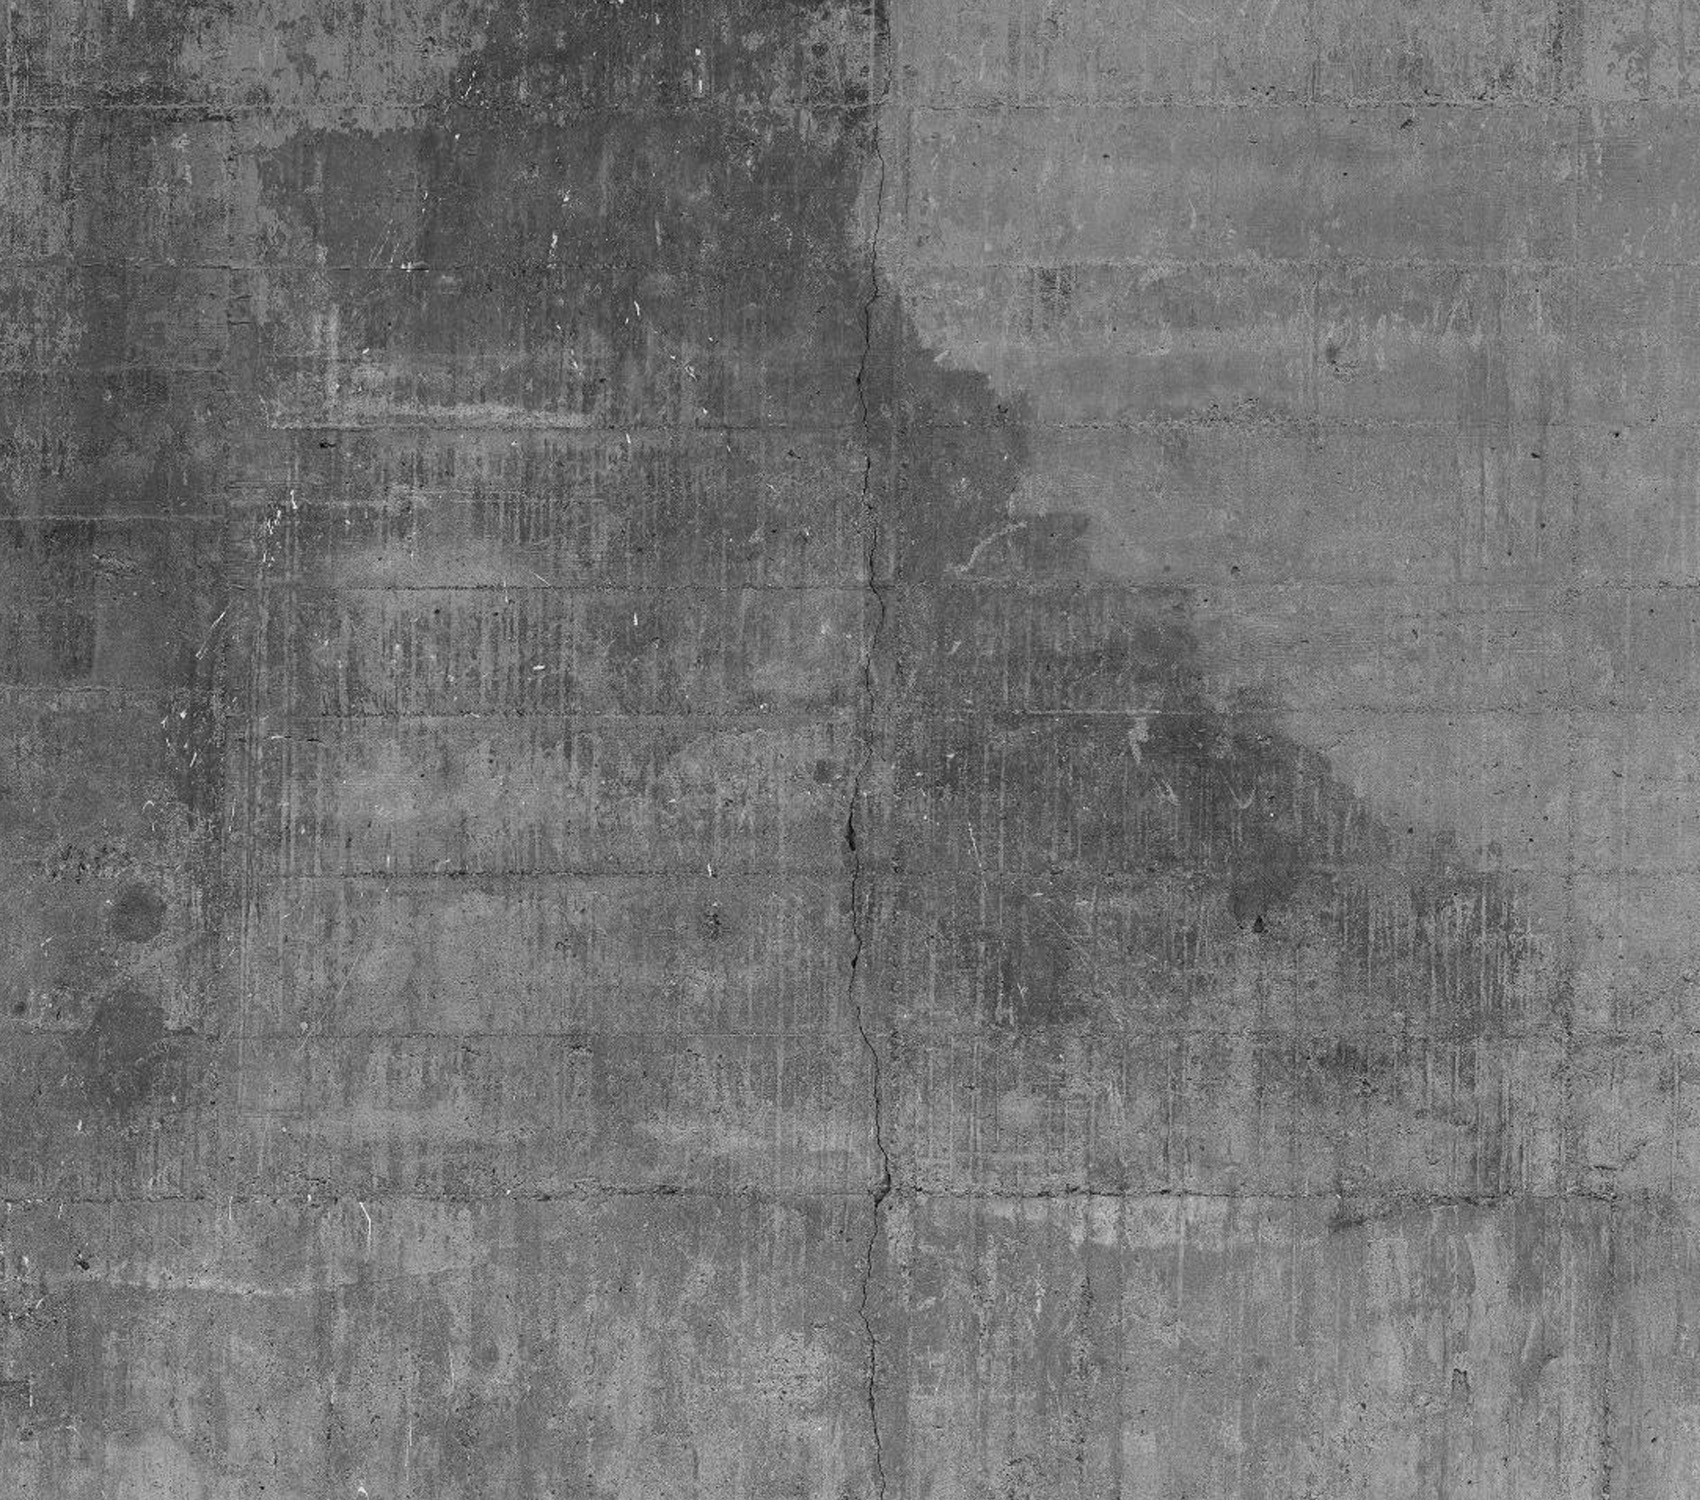 Can You Put Wallpaper On Concrete Walls?